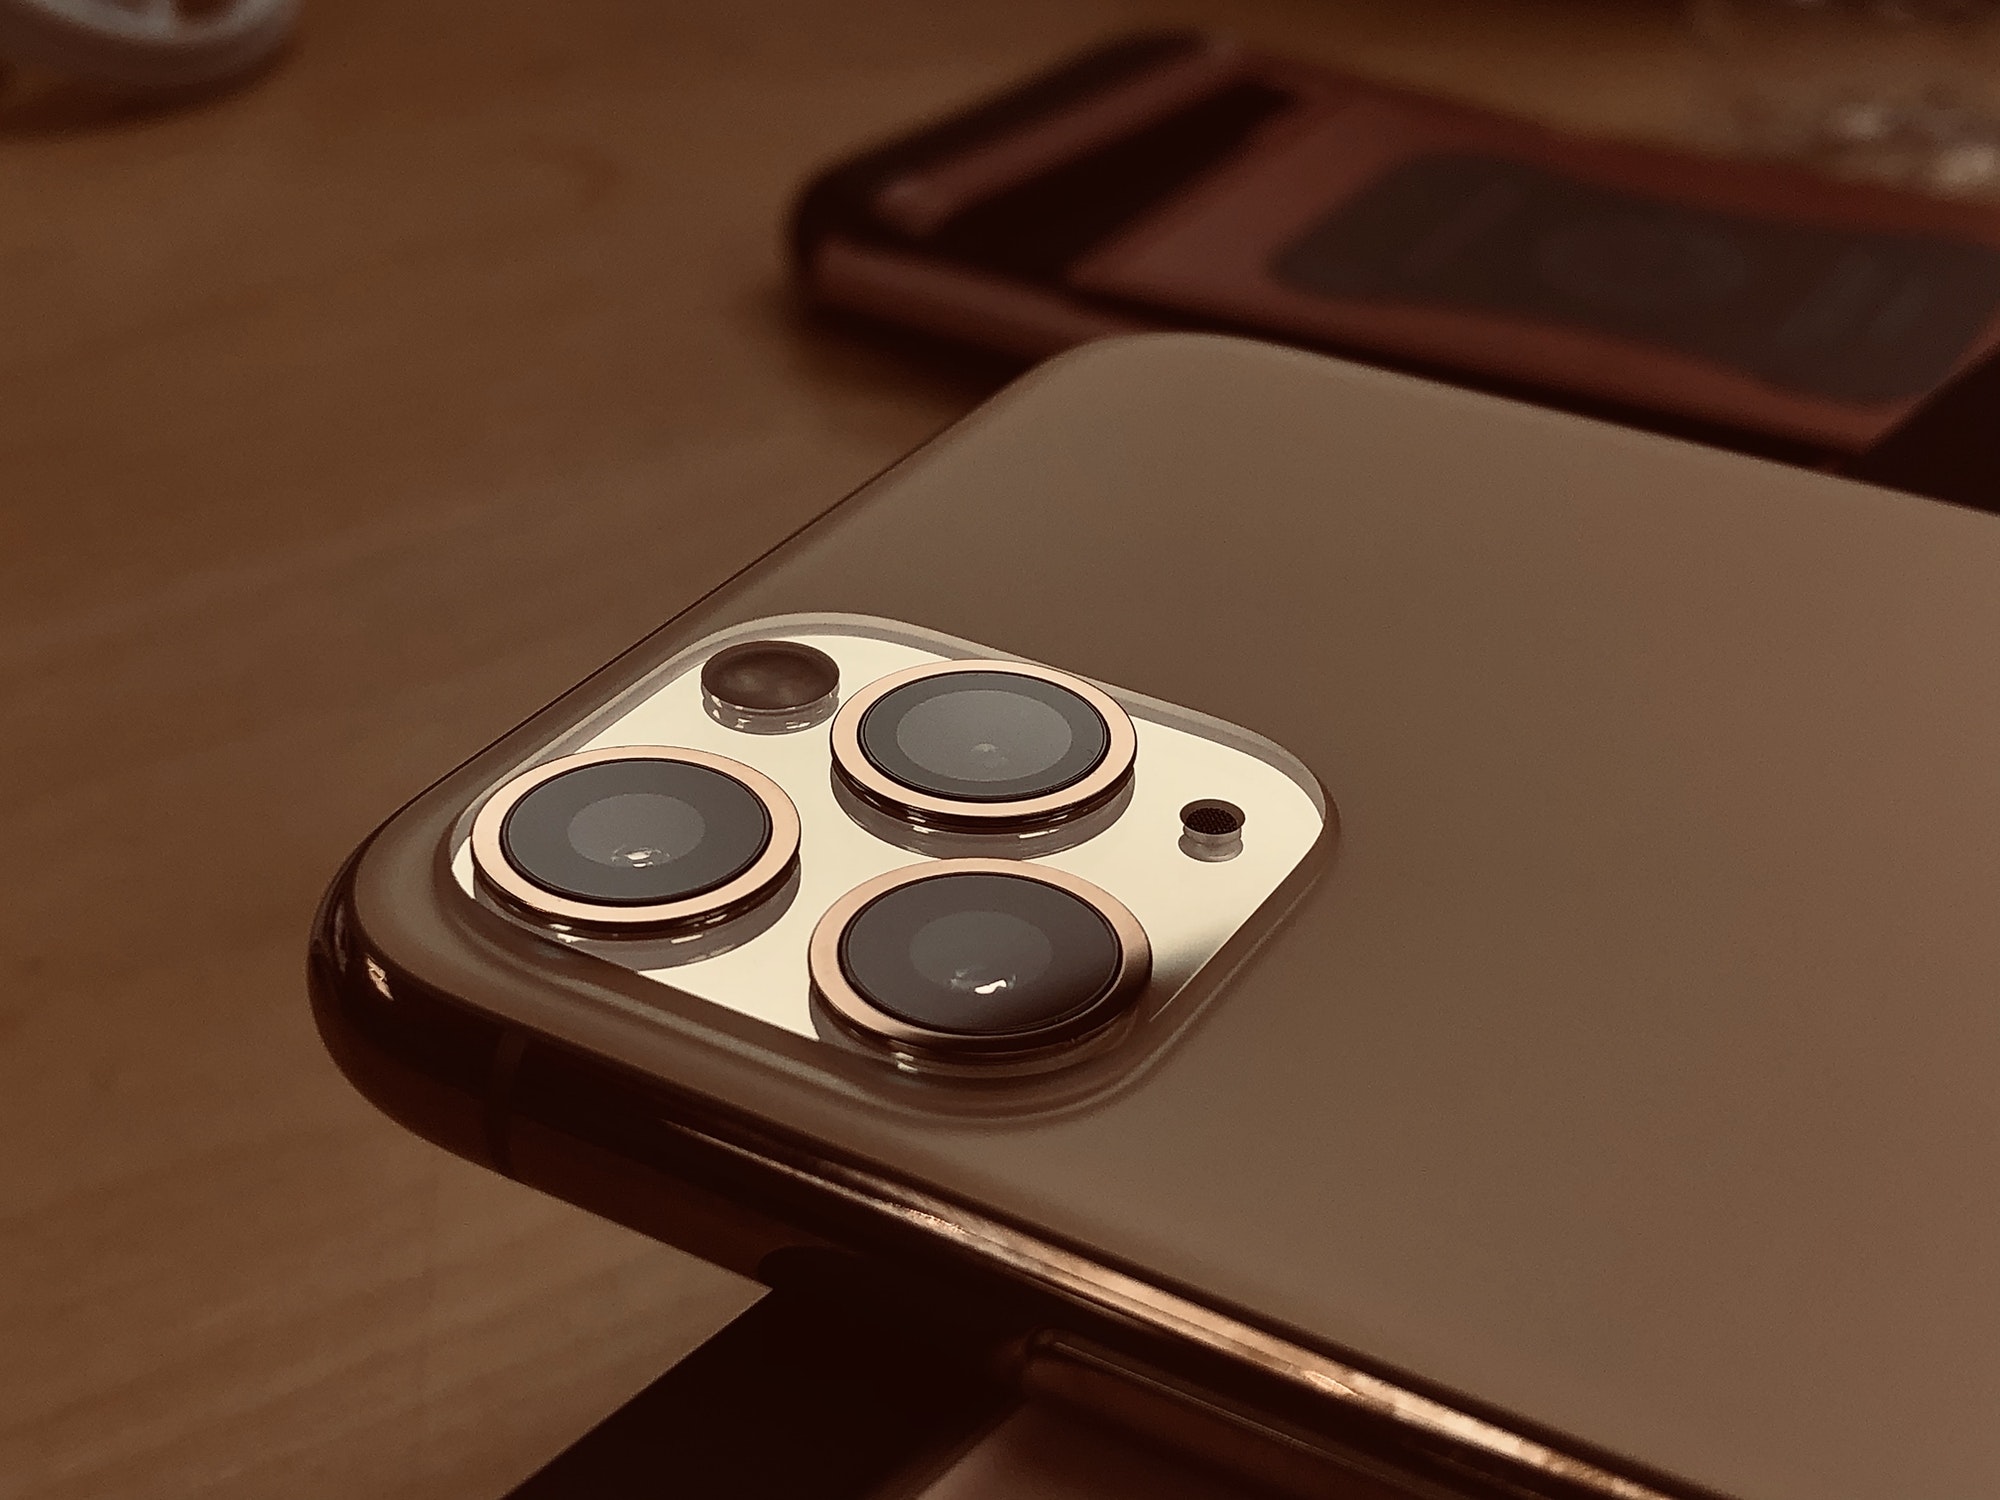 The triple lens camera on the iPhone 11 Pro Max! ?